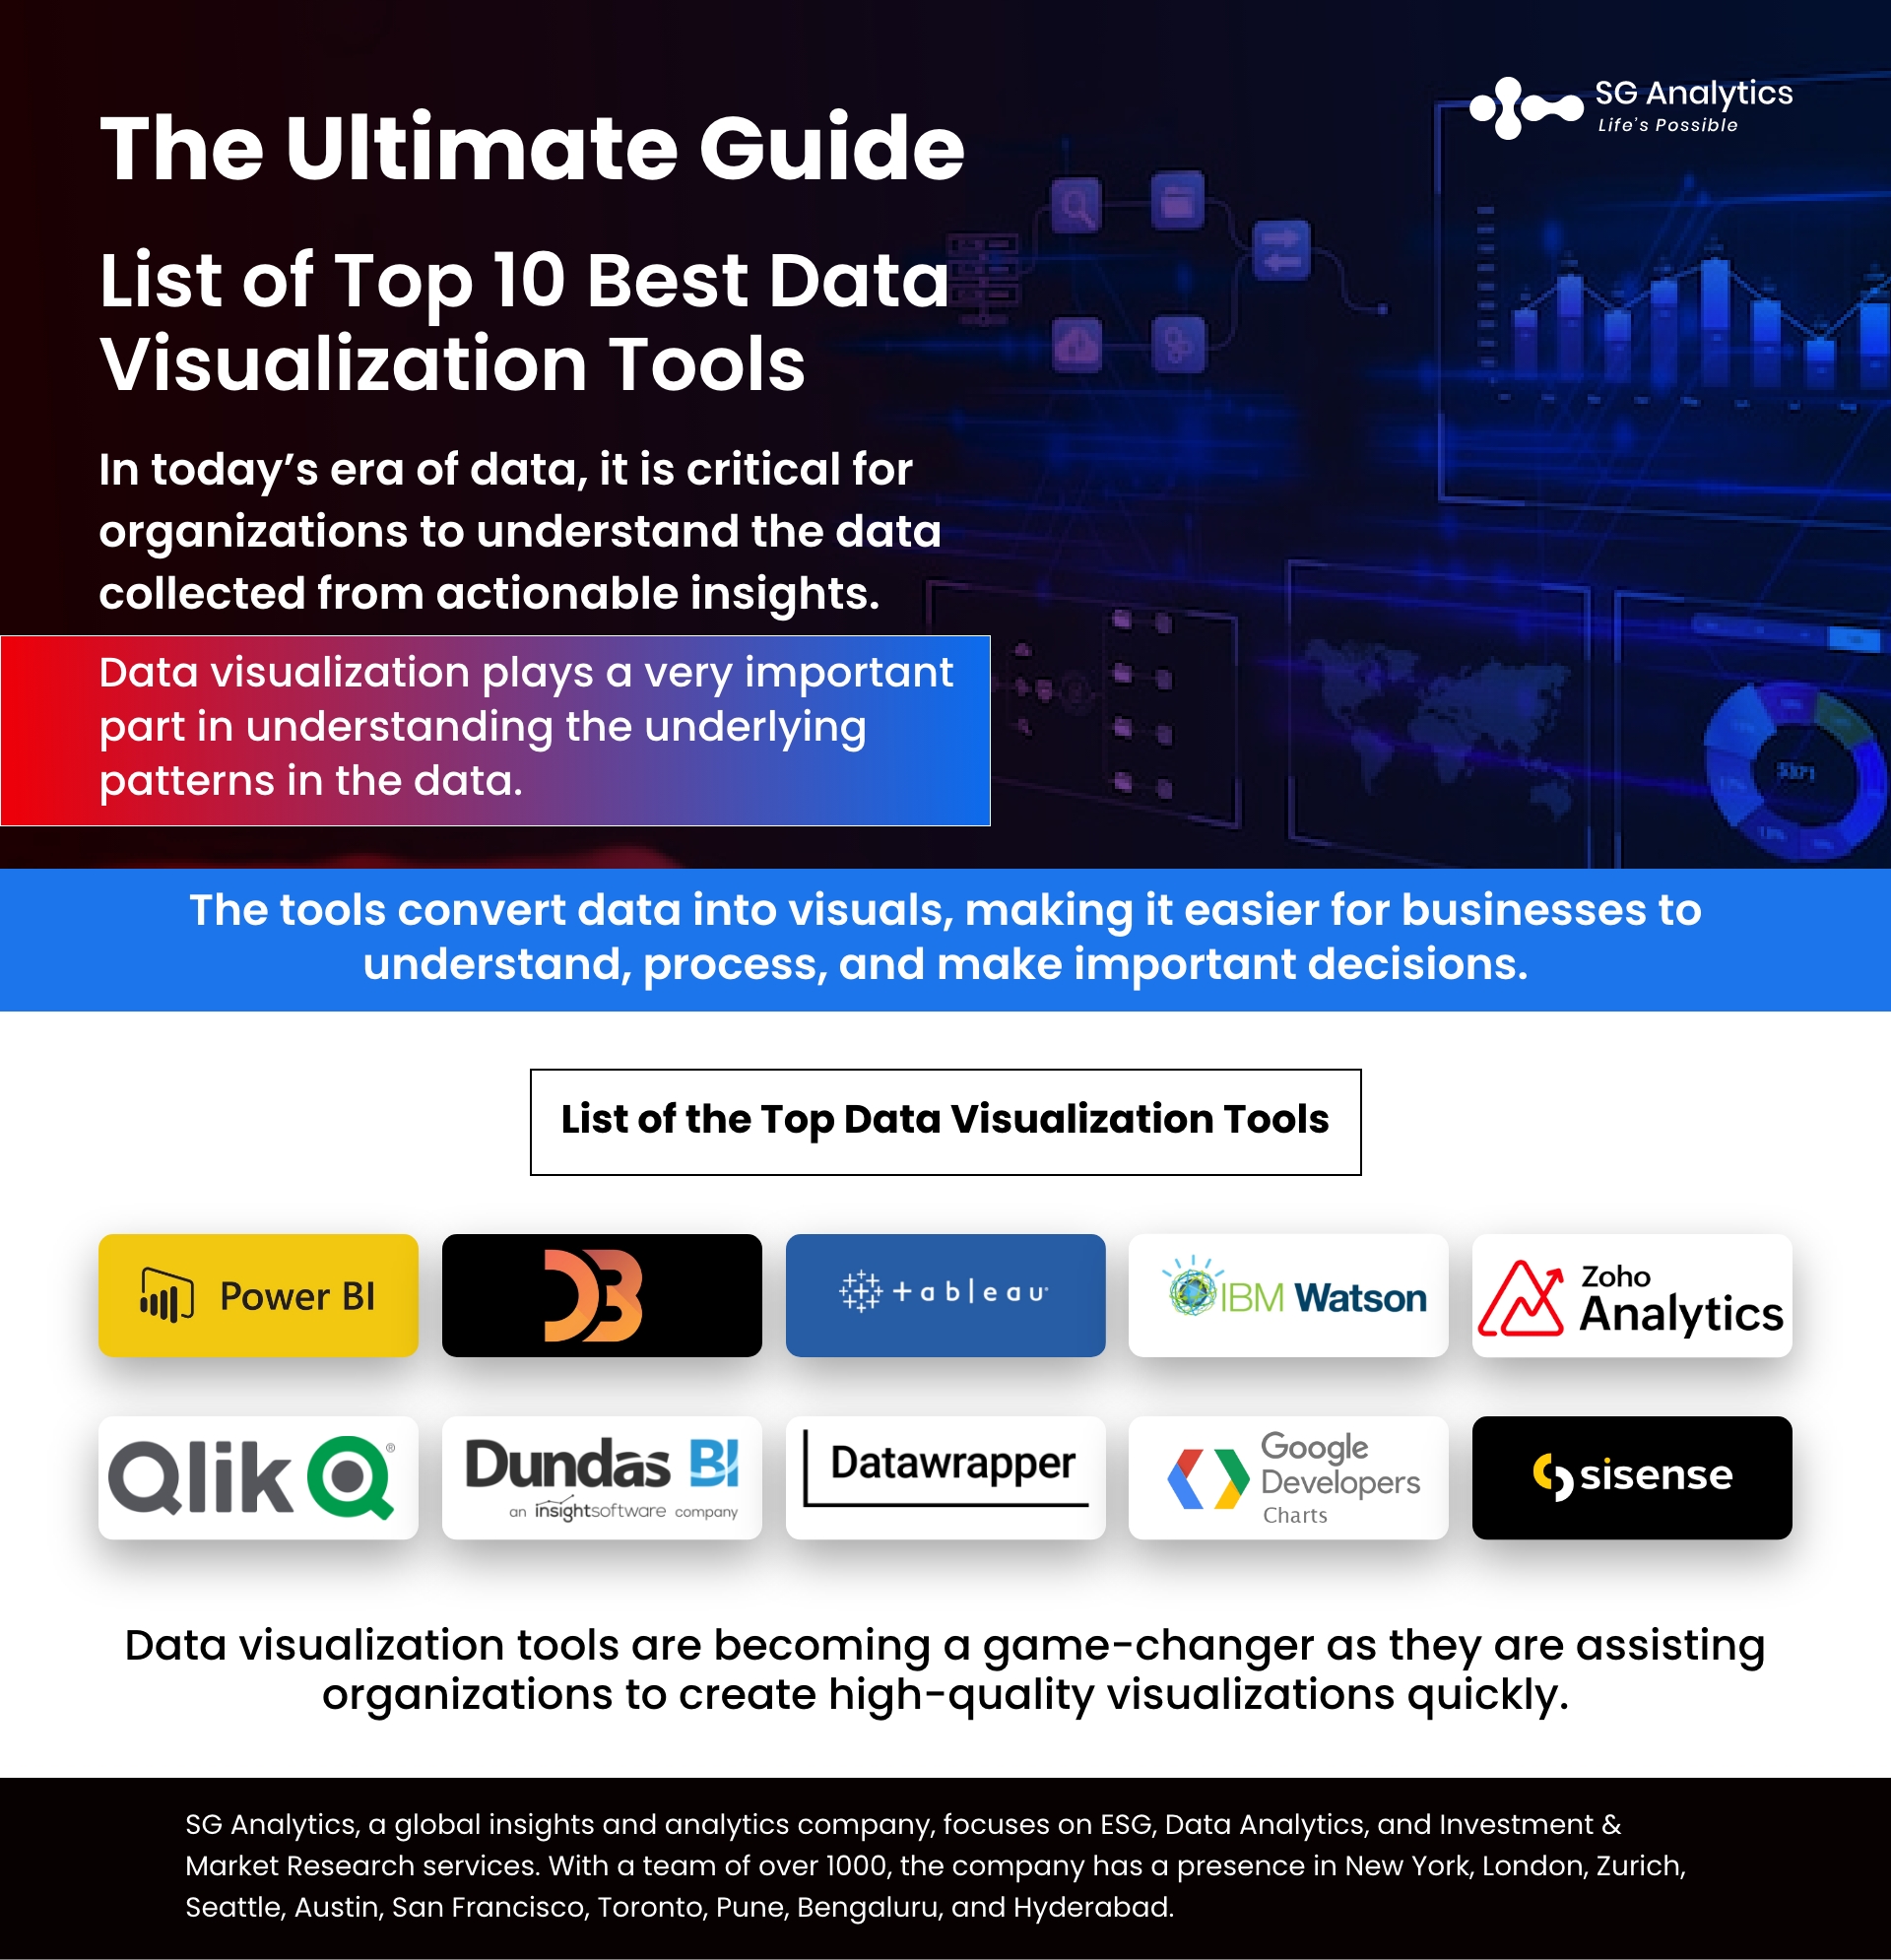 The Ultimate Guide List of Top 10 Best Data Visualization Tools